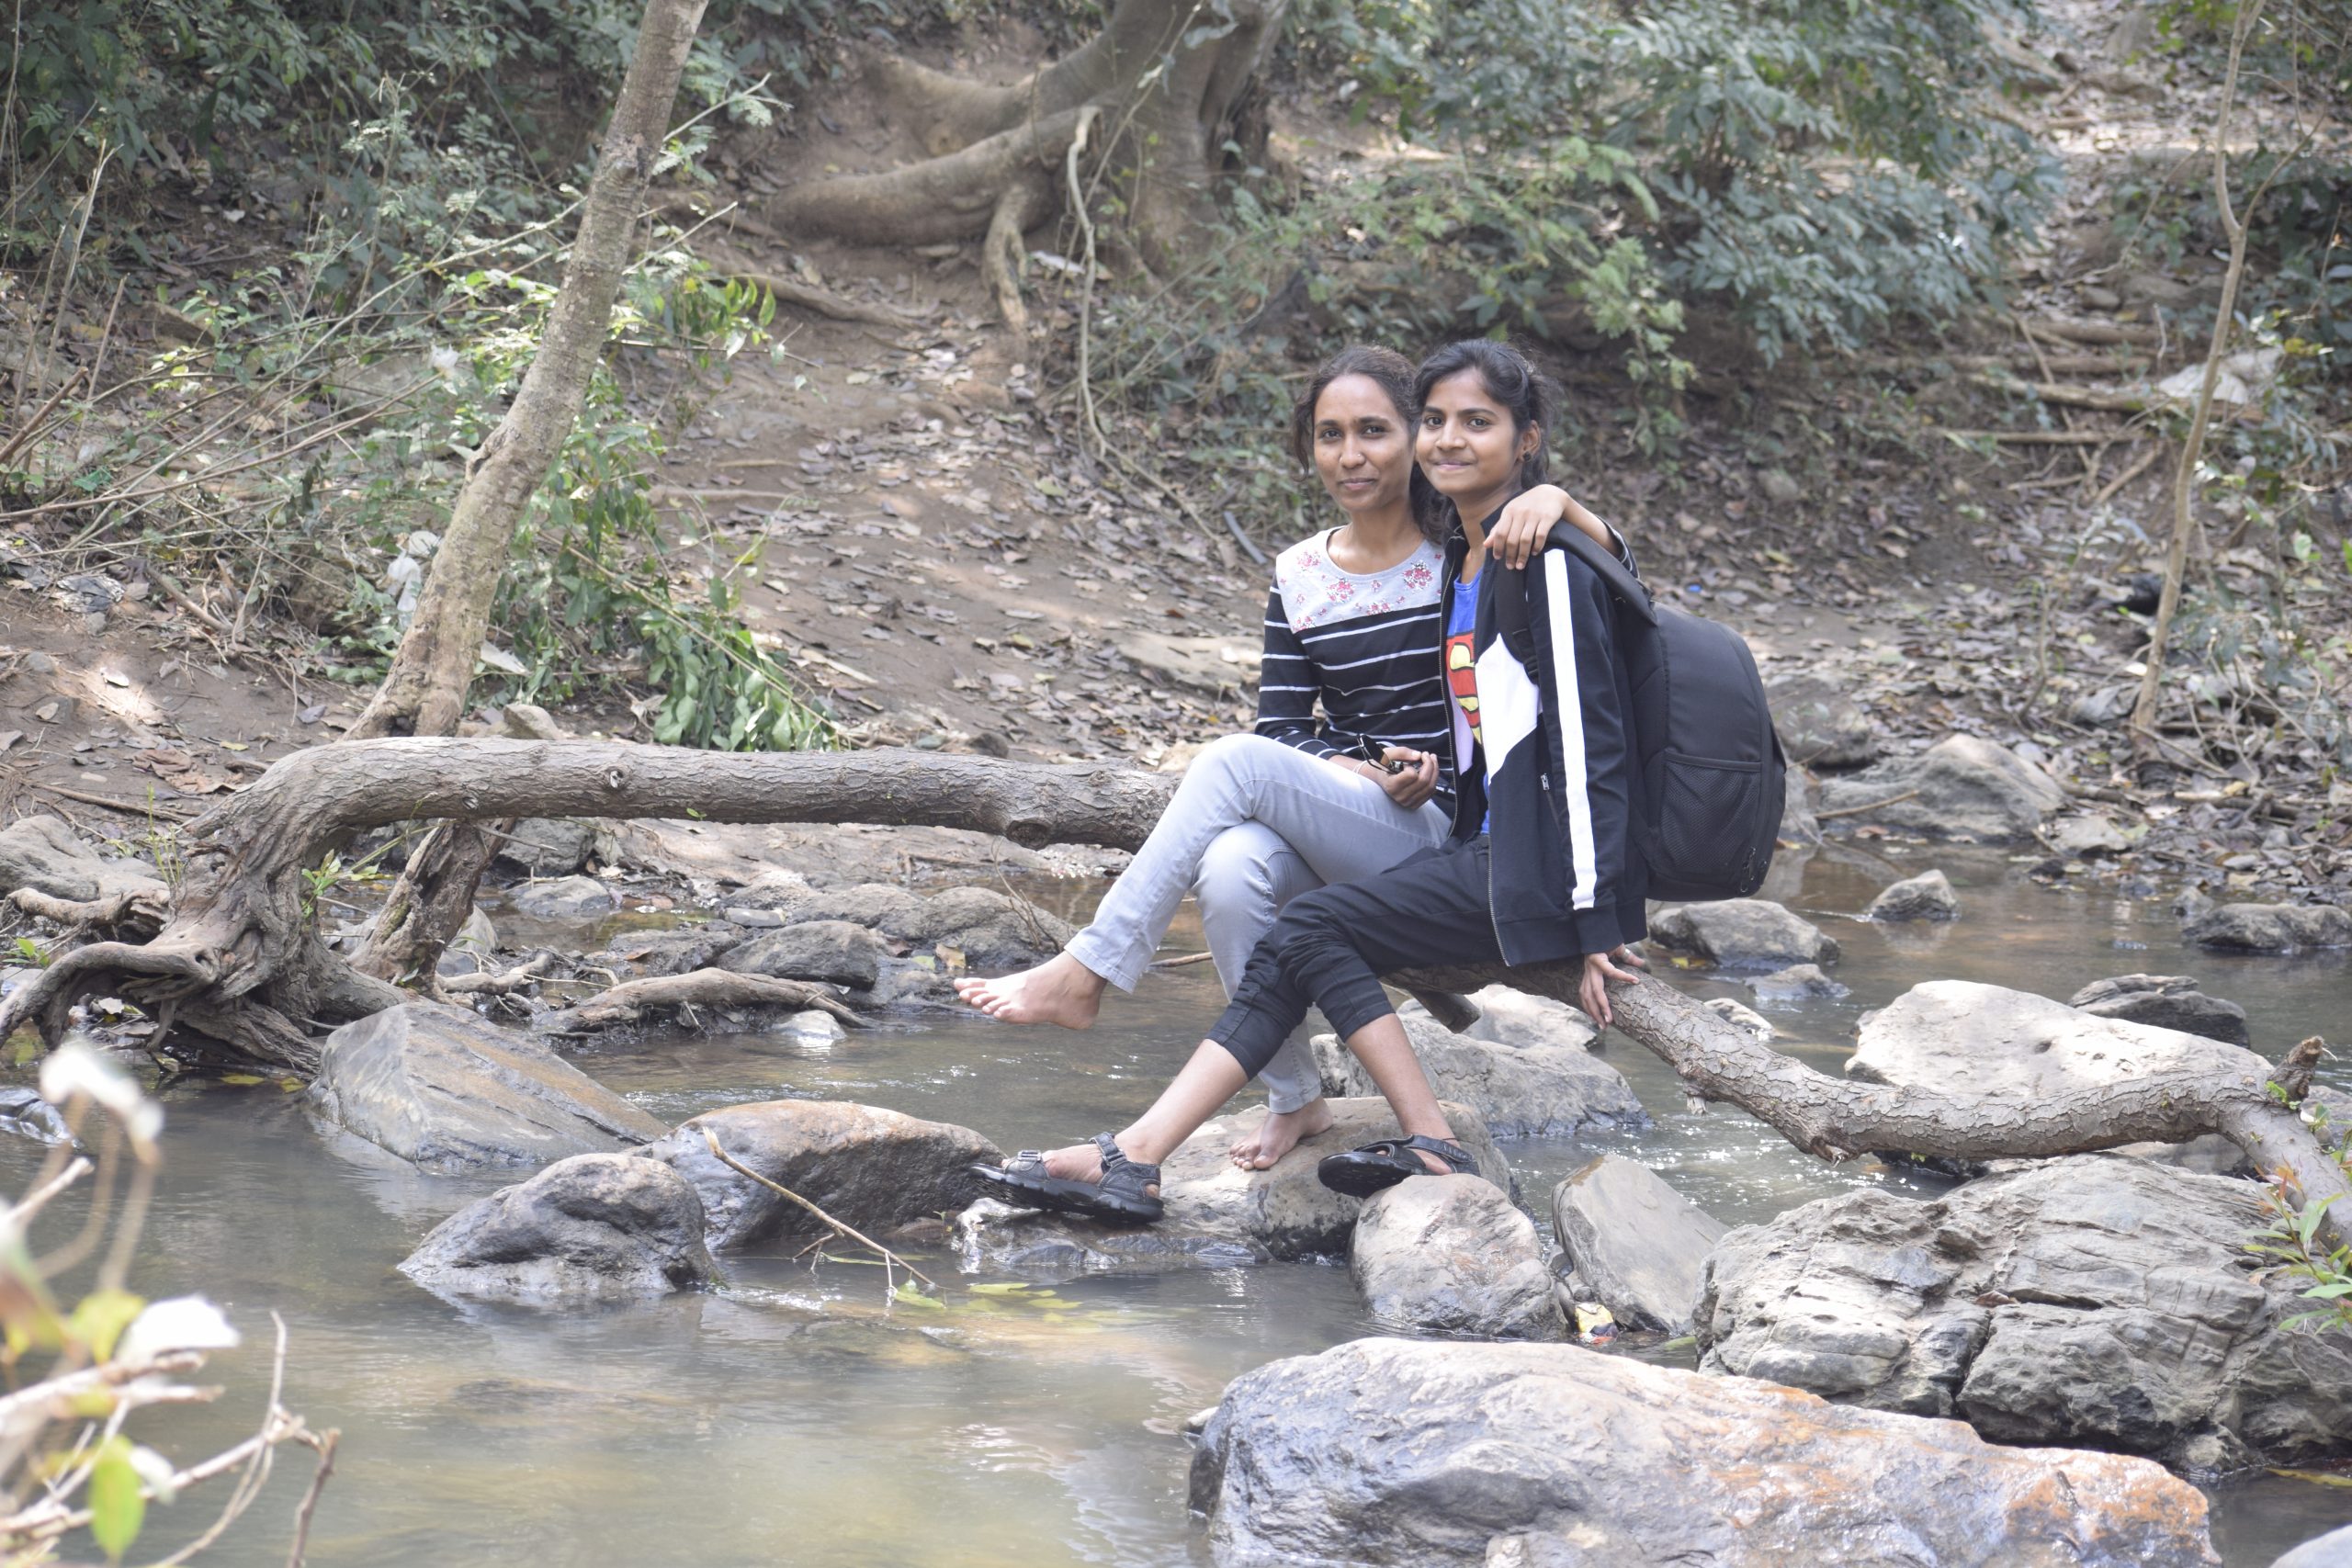 Taking Photos in the River